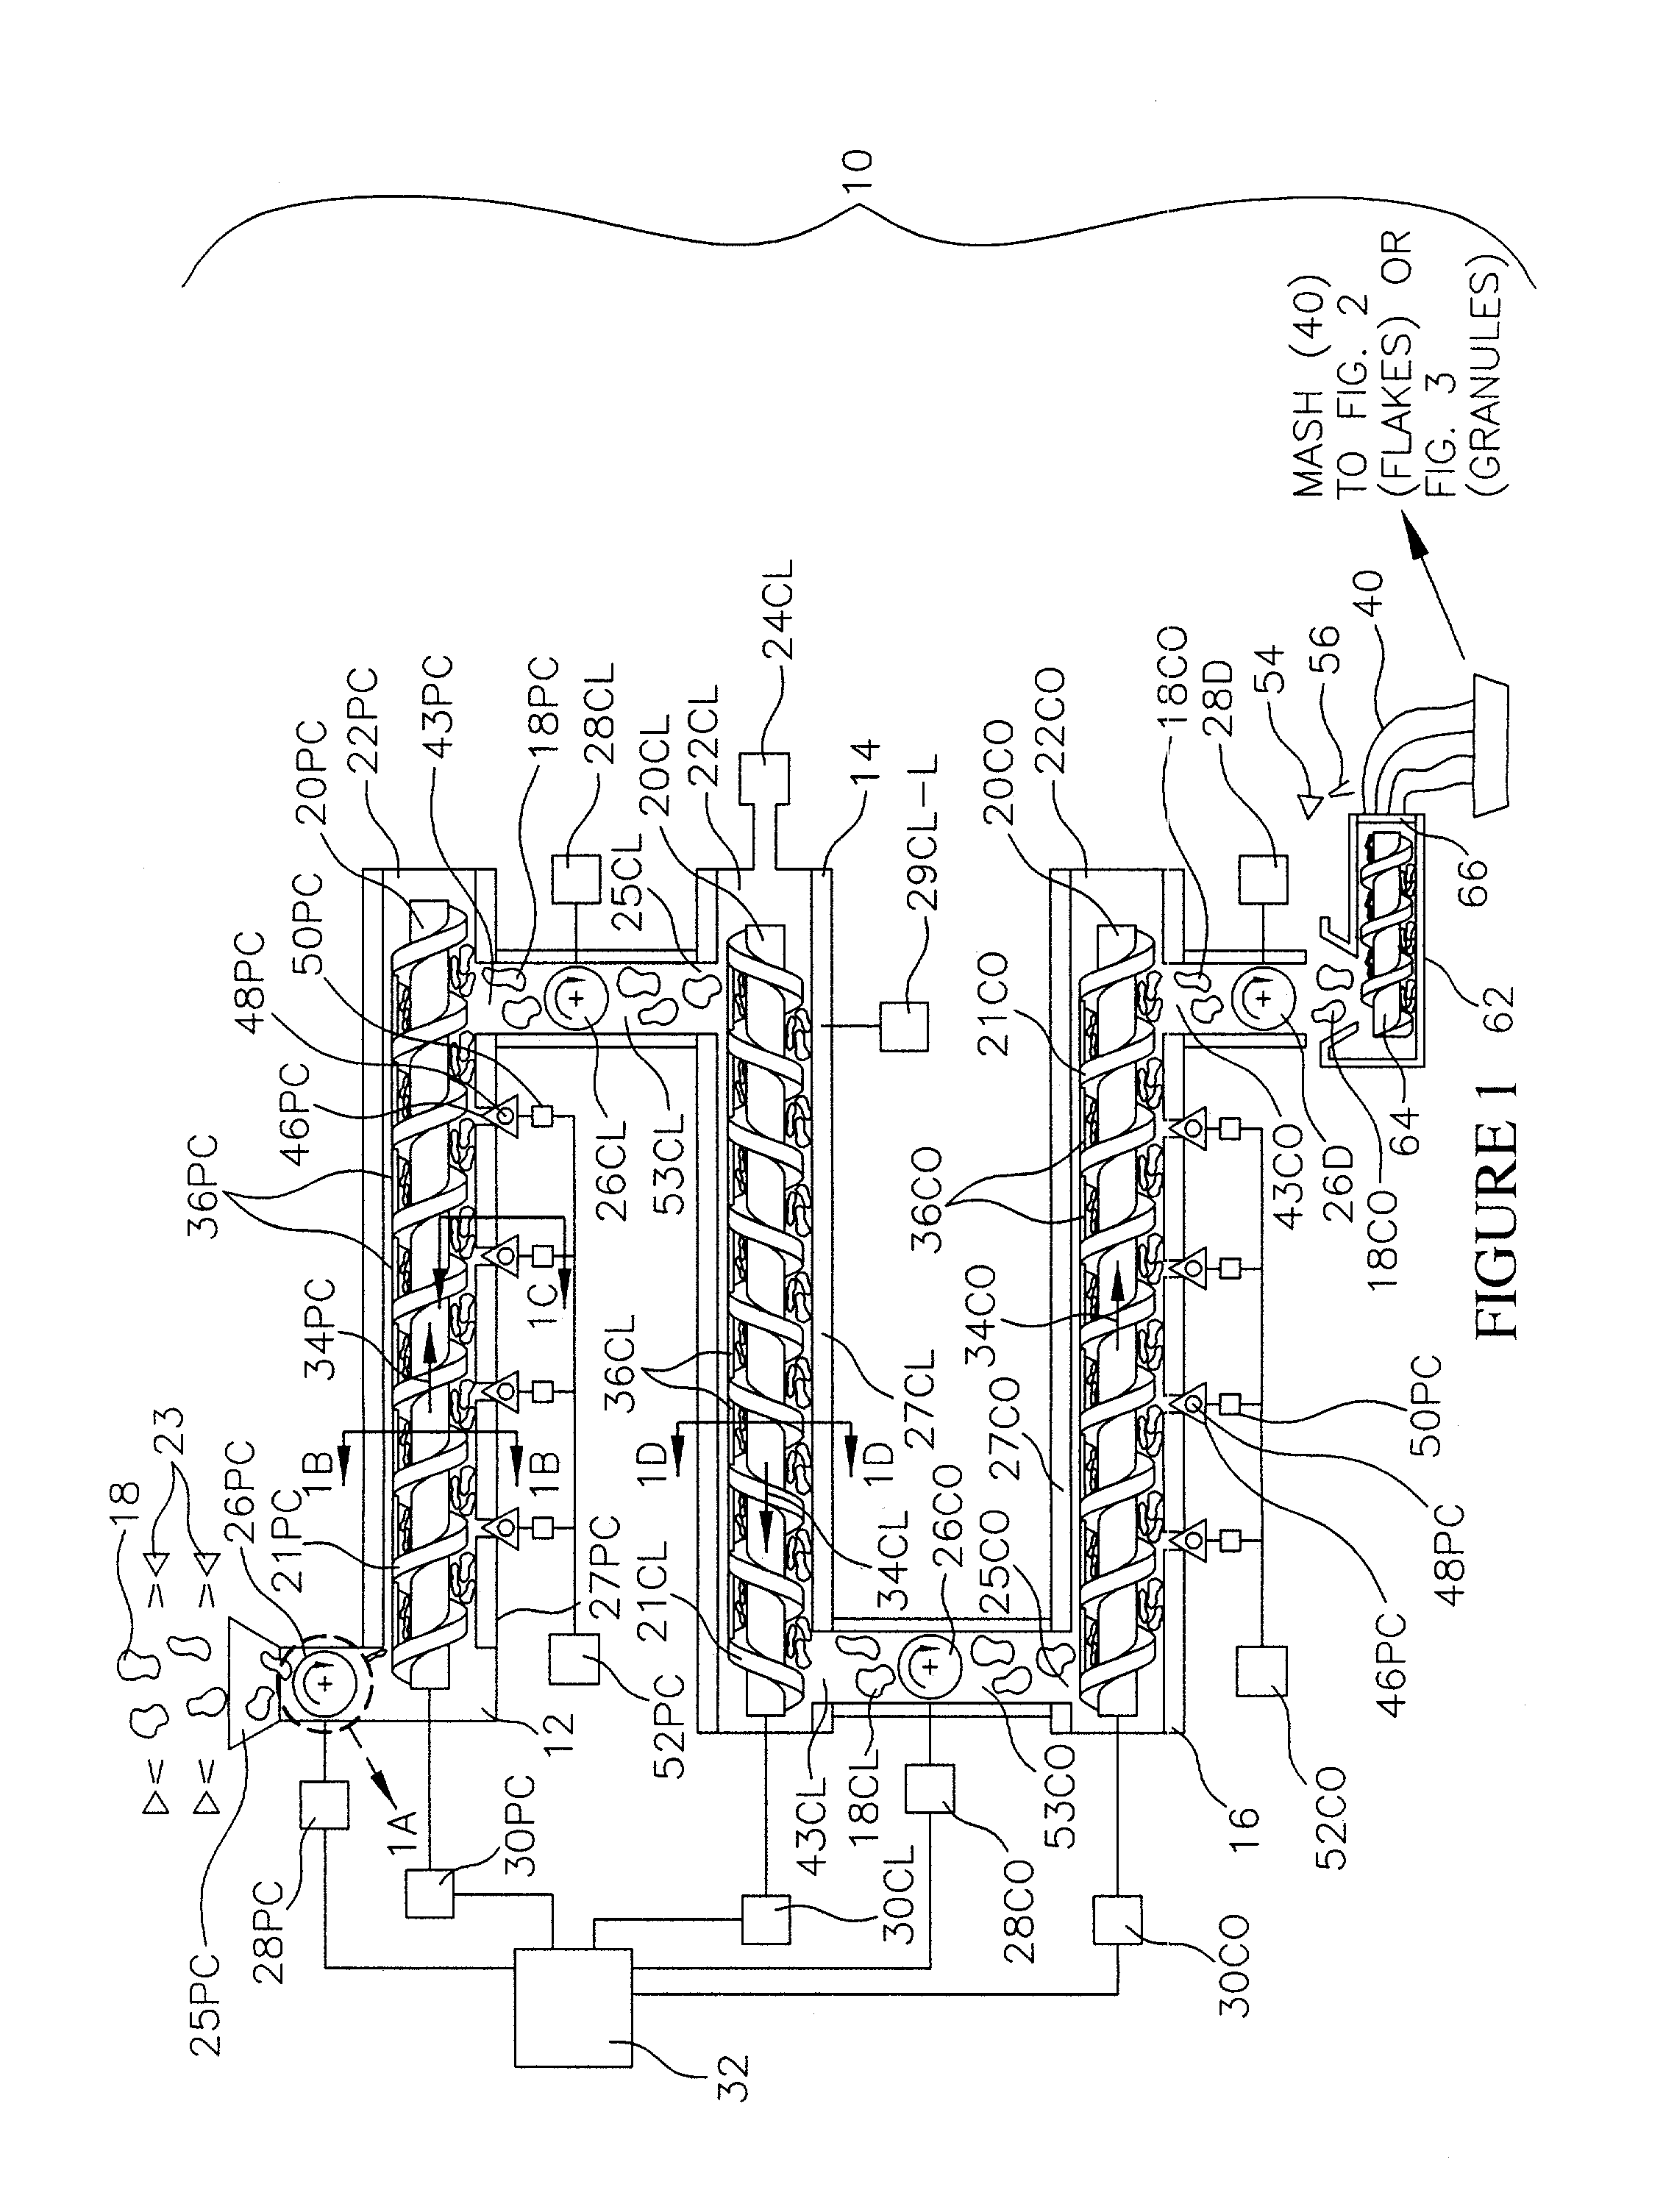 Sealed system and continuous process for making food products